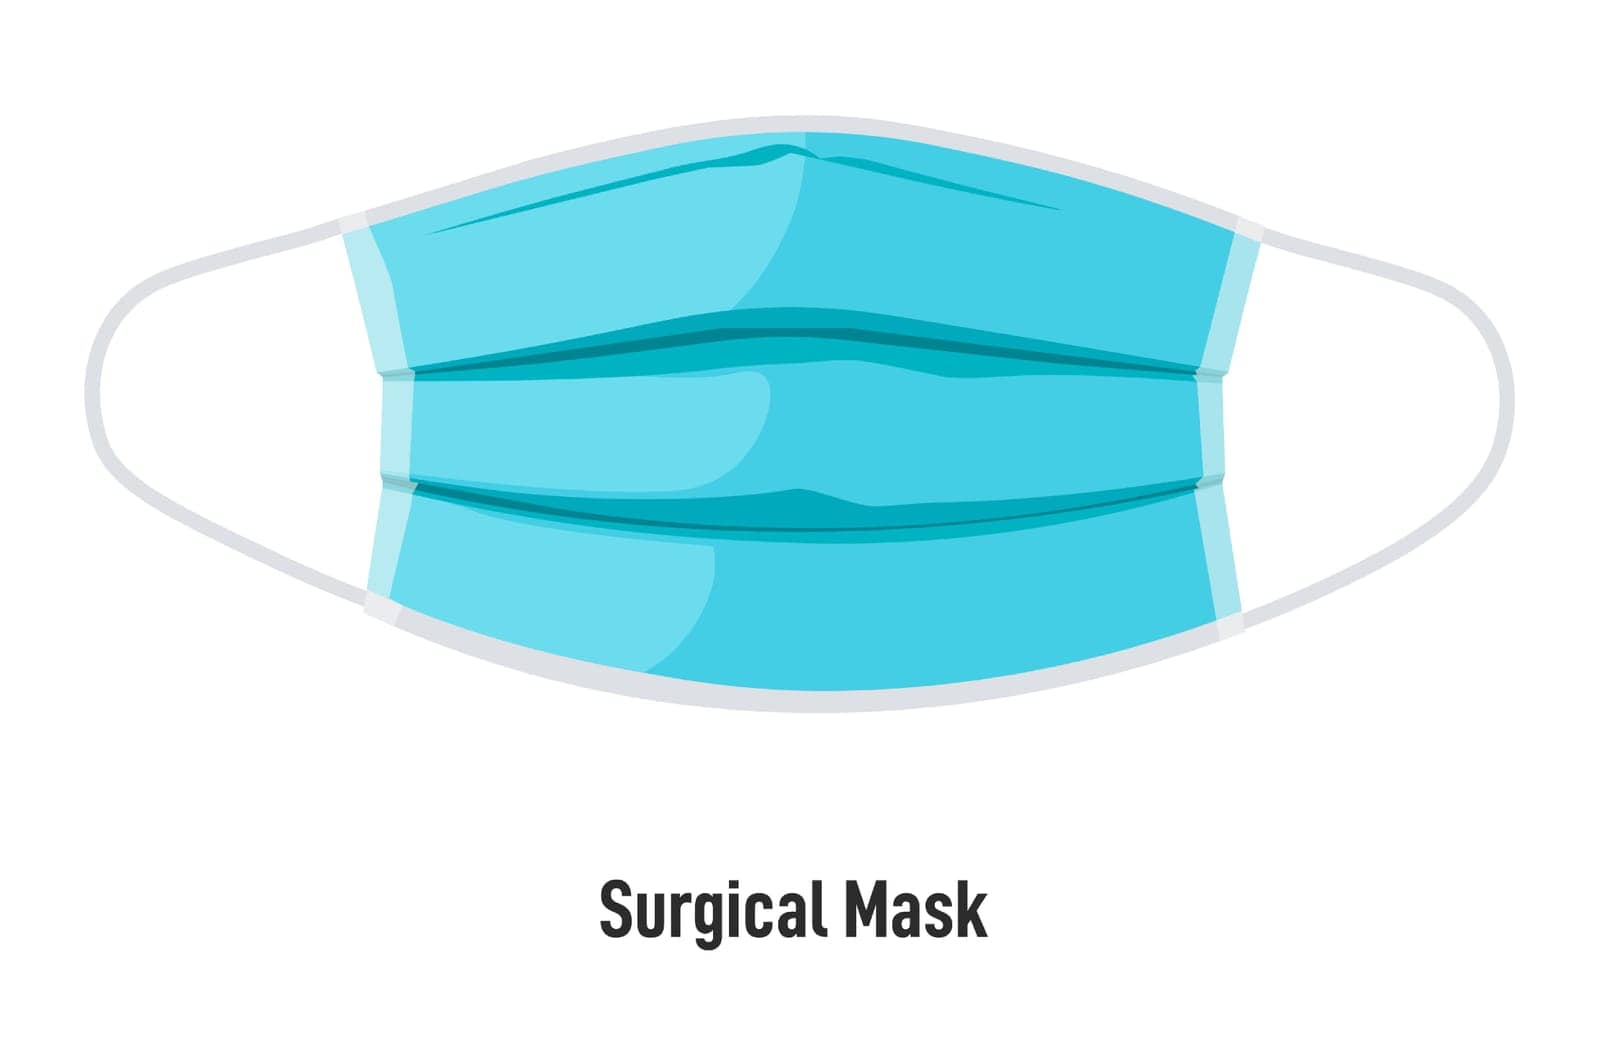 Facial covering protecting from dust and viruses. Isolated surgical mask against coronavirus spreading. Prevention of sickness increasing. Equipment for medical workers. Vector in flat style